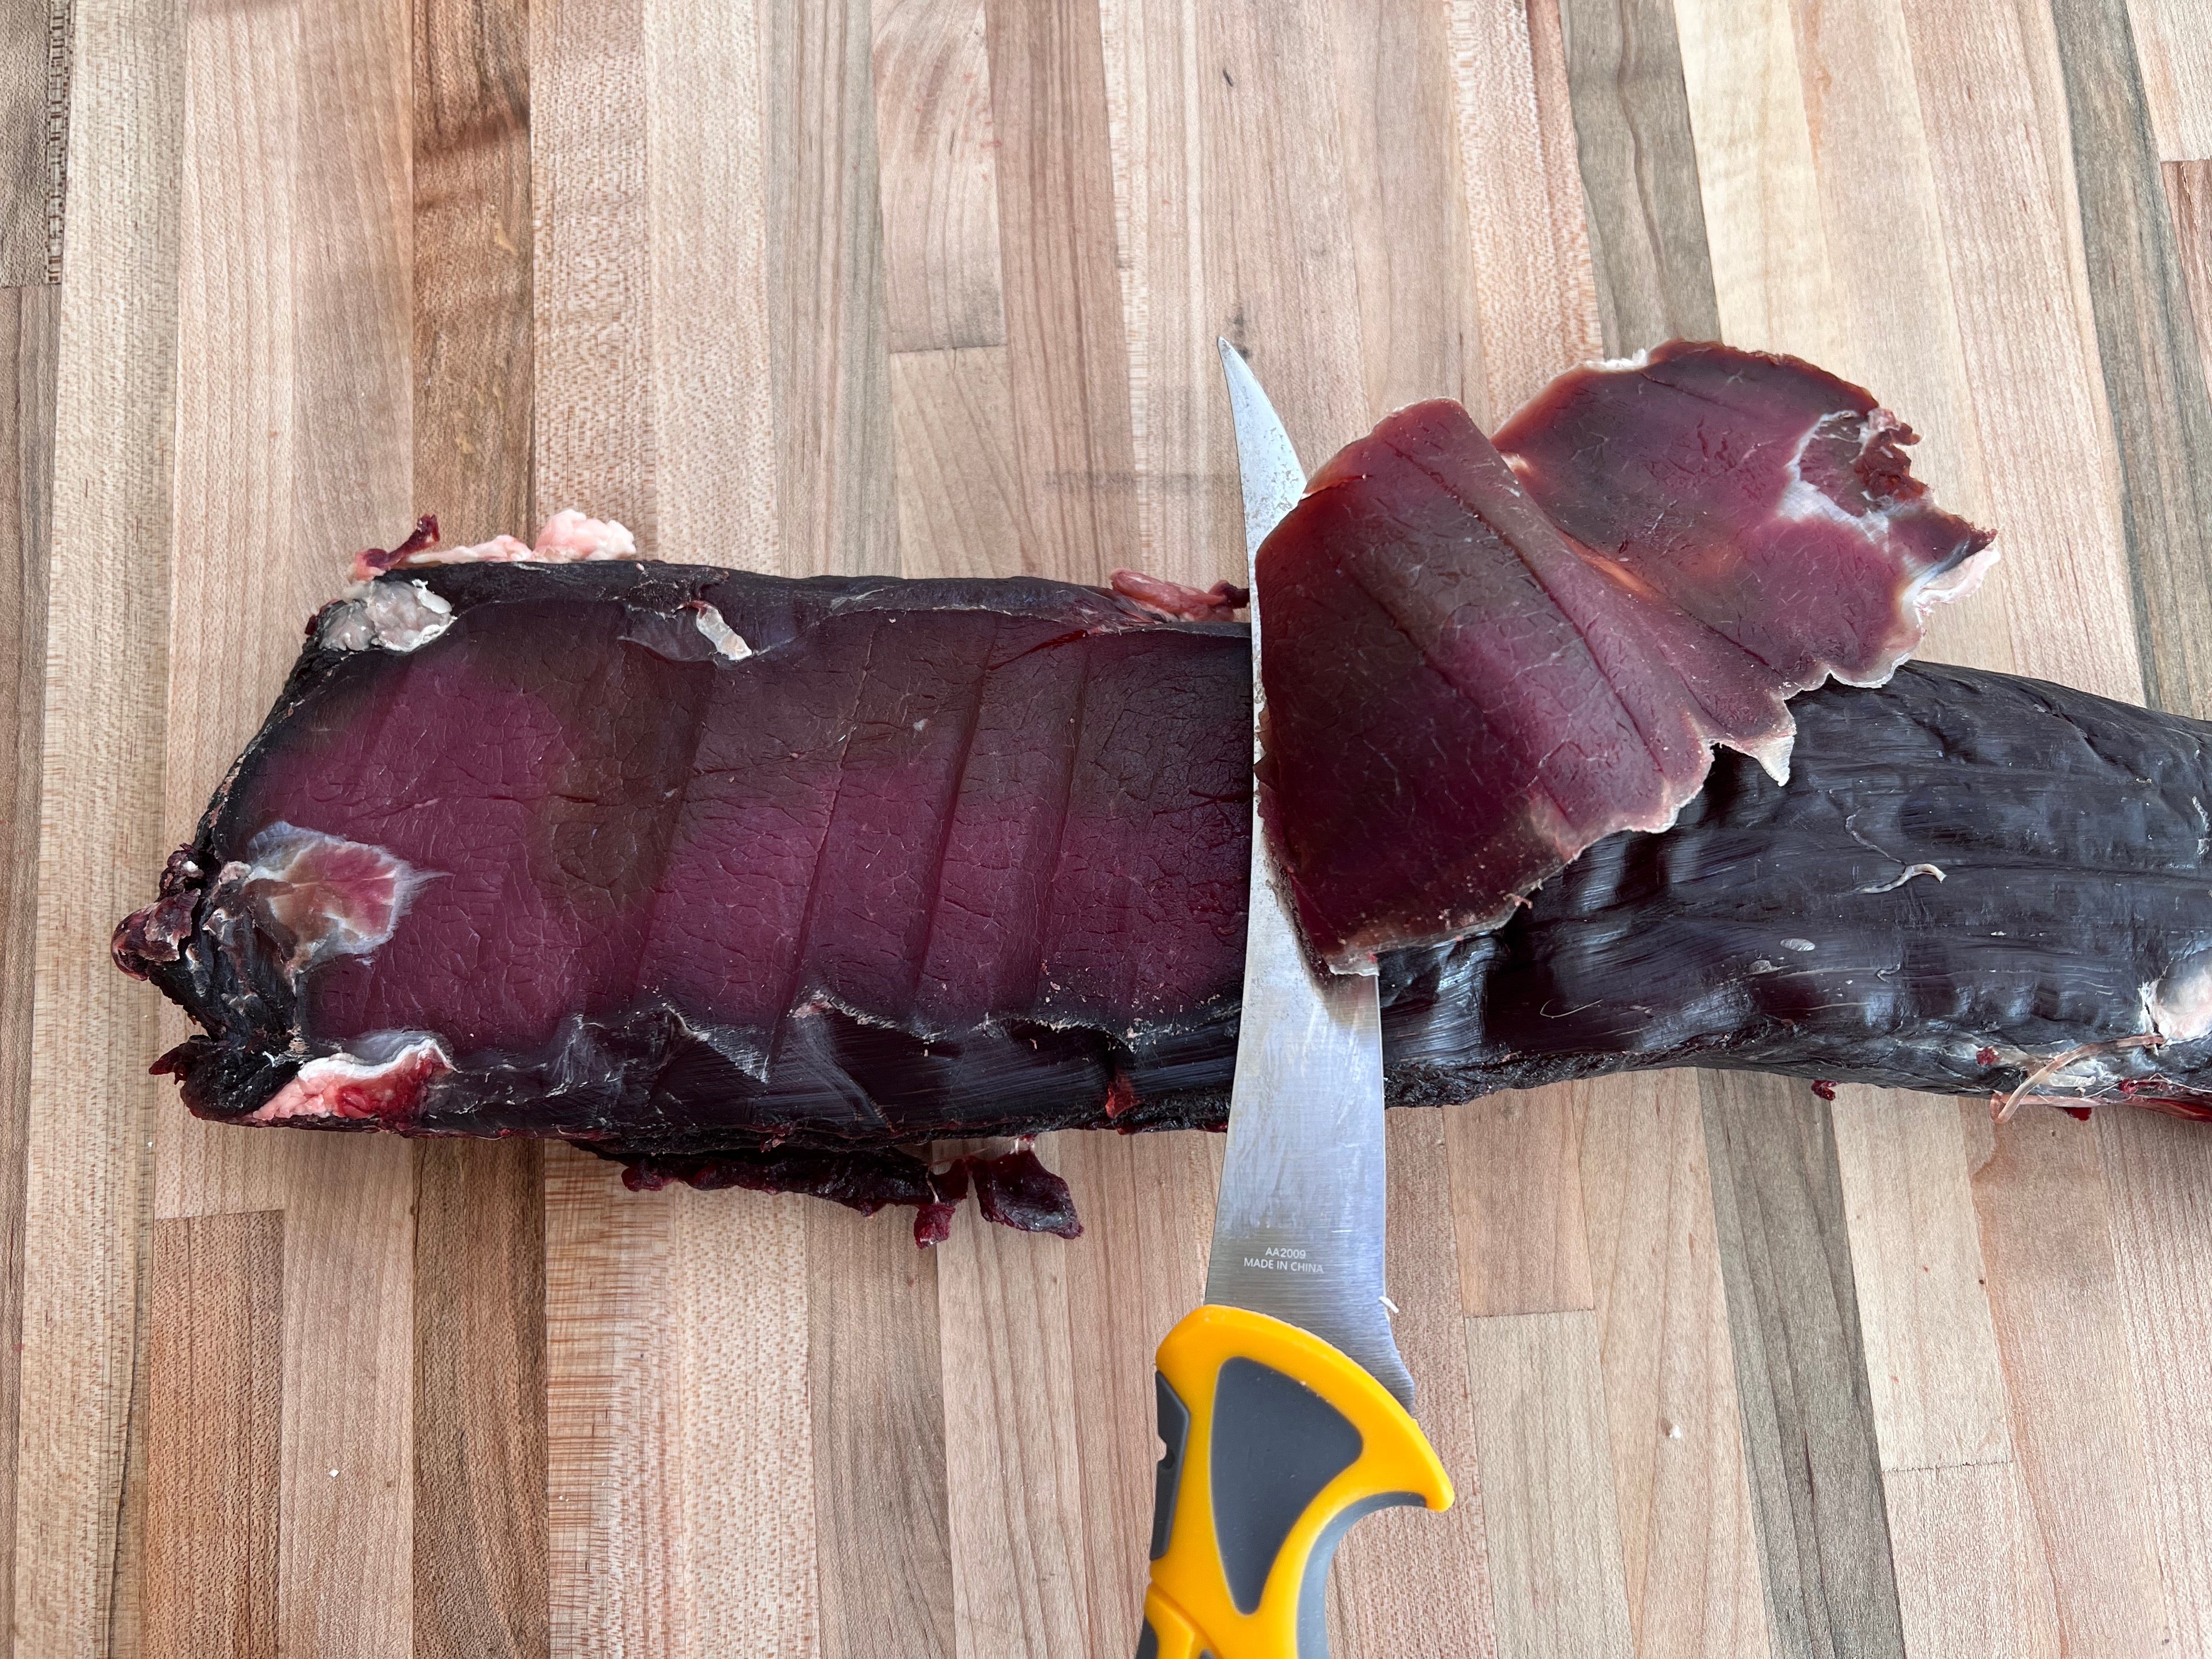 Wild Game Processing Gear Review: Making Meat With MEAT!